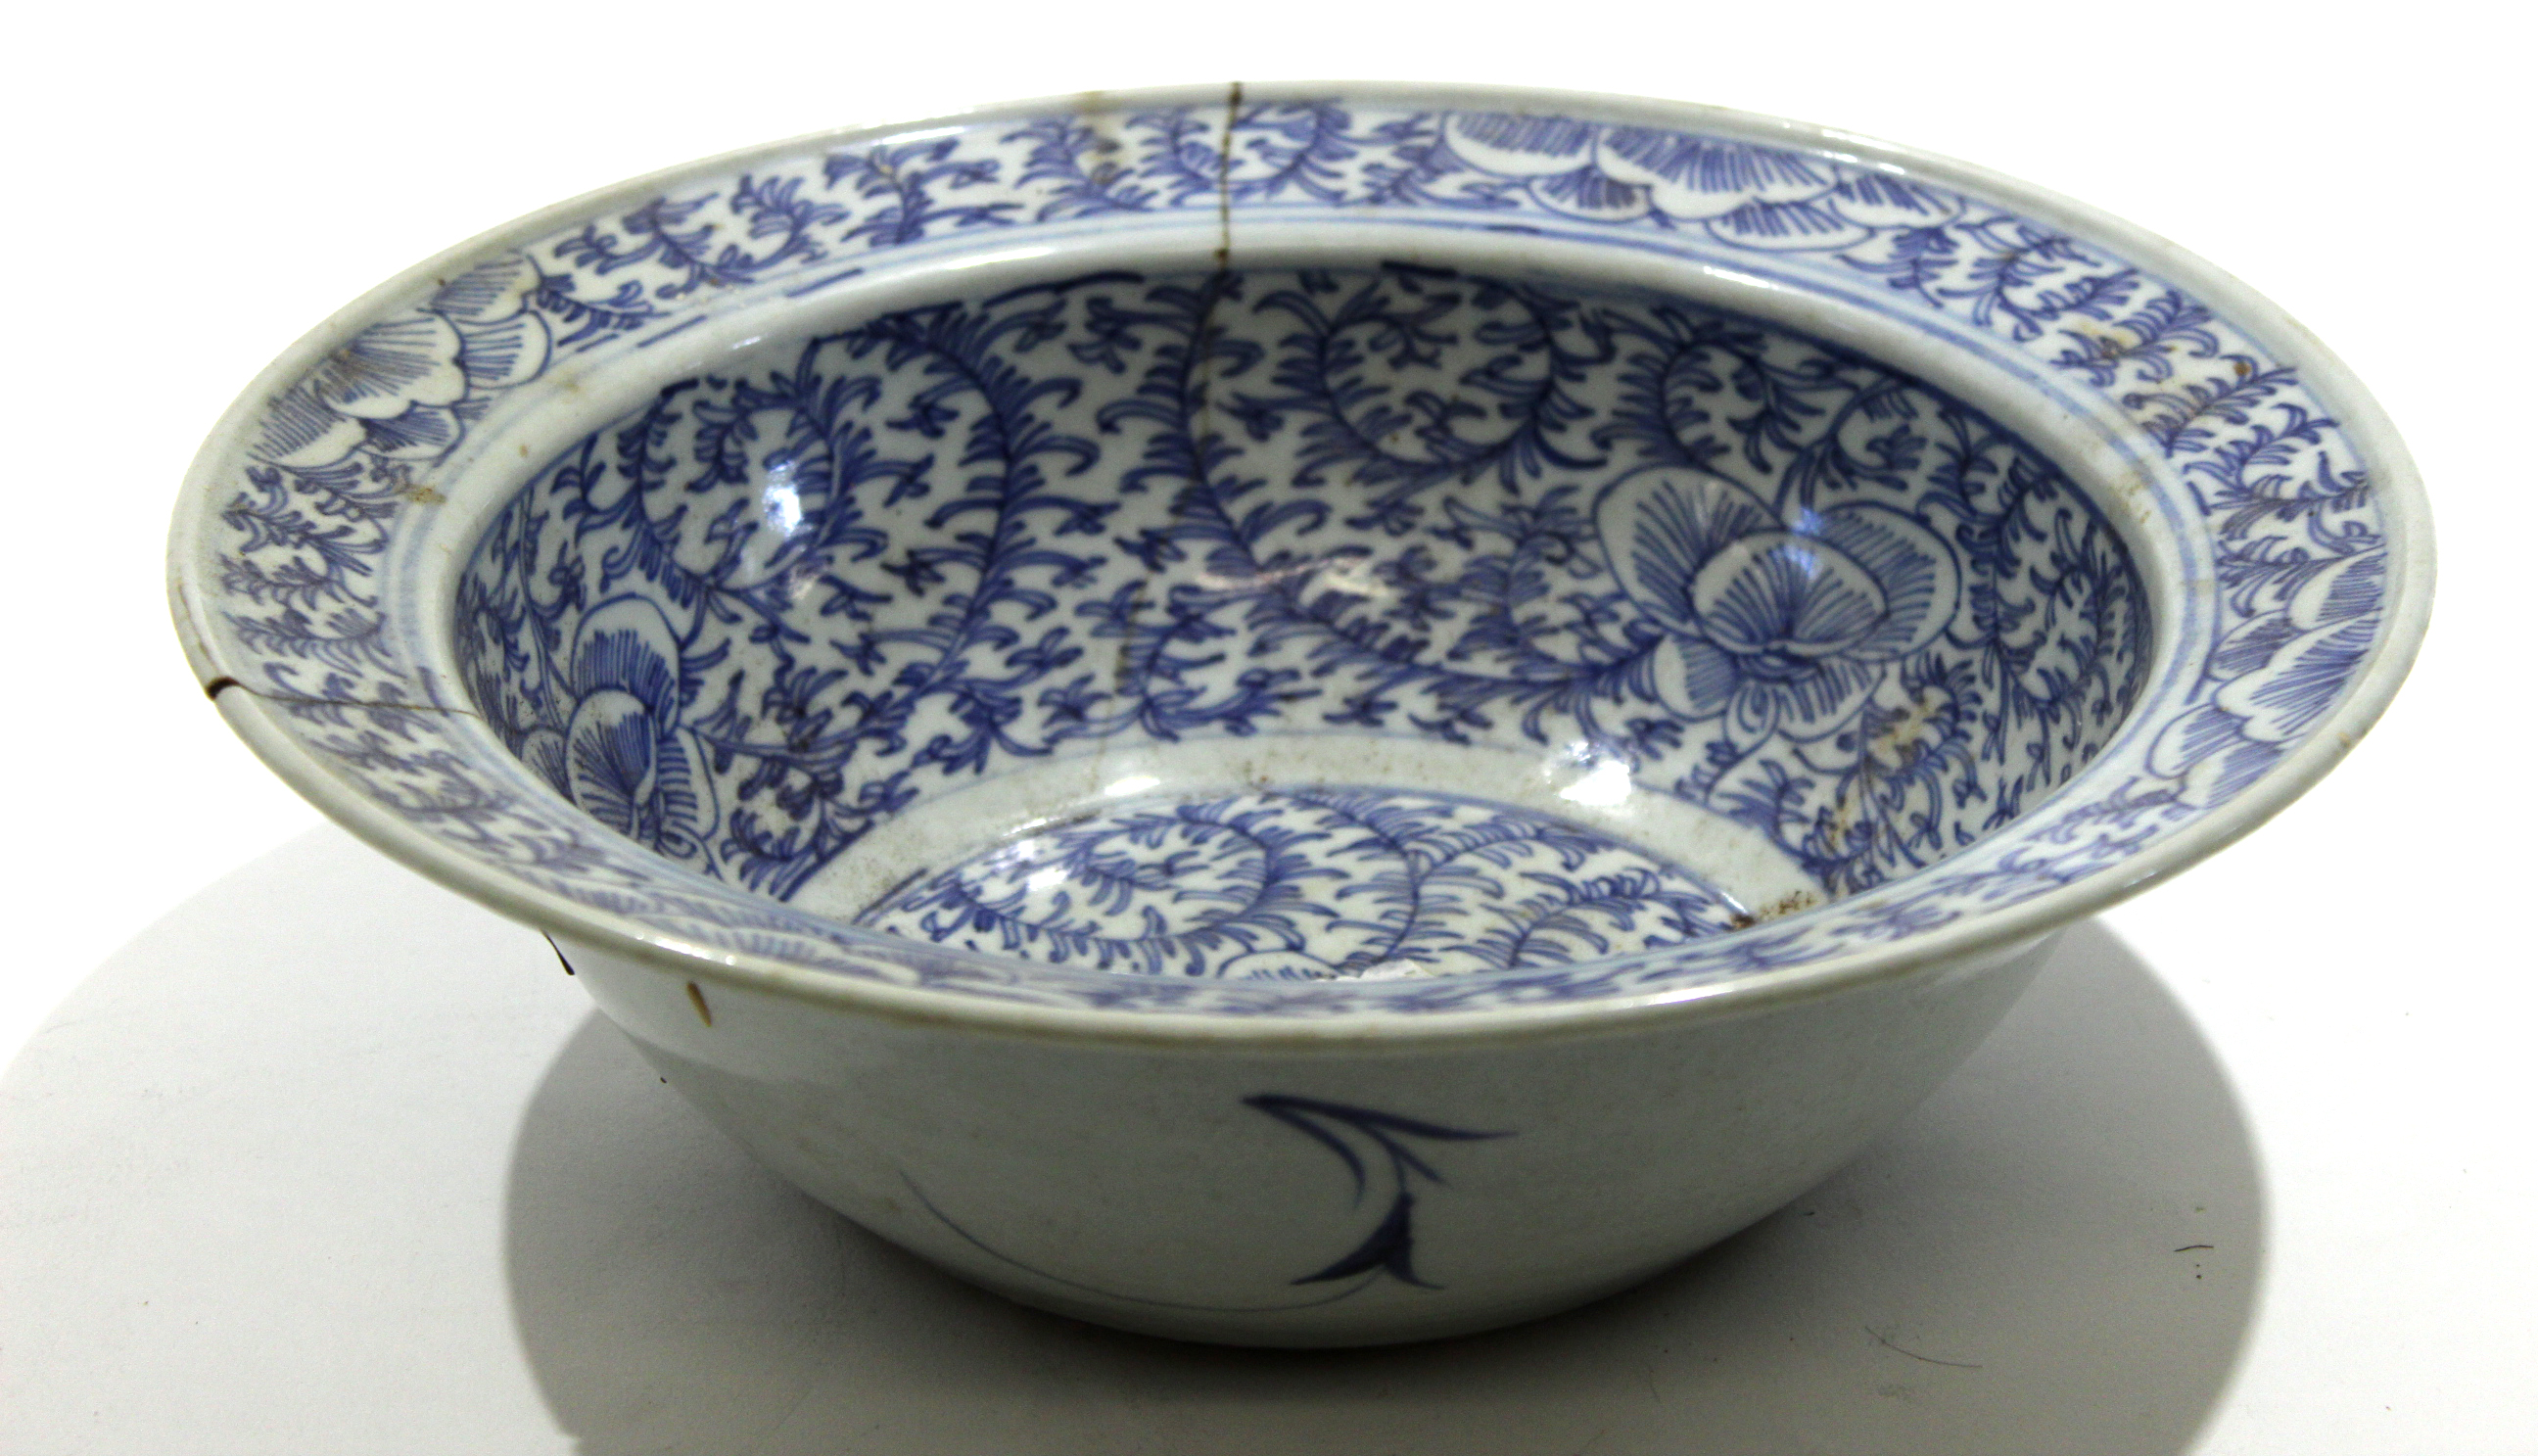 Ming style bowl, decorated in typical fashion with sale label for Philips Lot No 284 Sale No 1694,